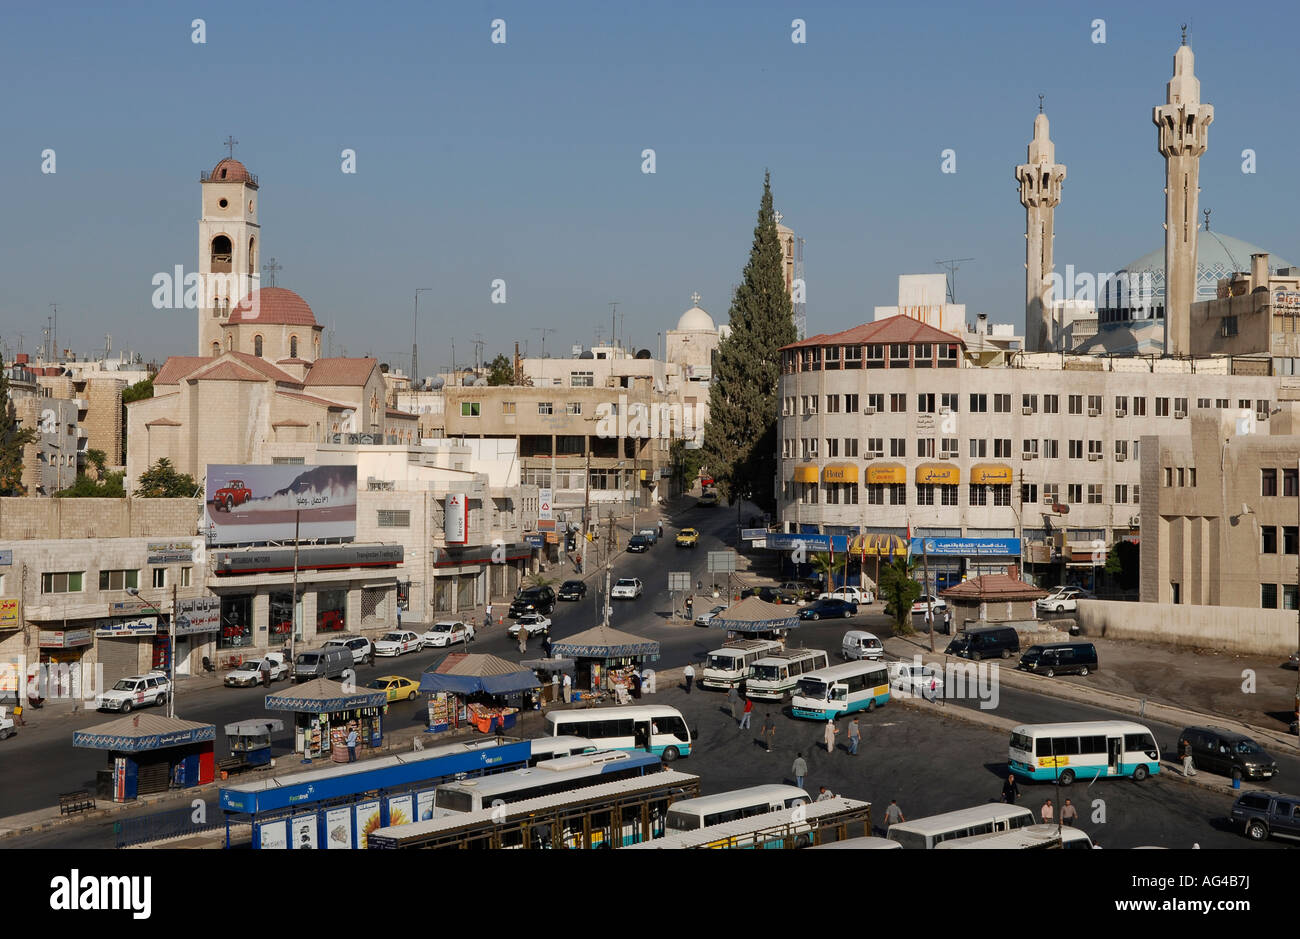 nedenunder Fundament stout View of the JETT bus station located near to the King Abdullah I Mosque in  Amman downtown Jordan Stock Photo - Alamy